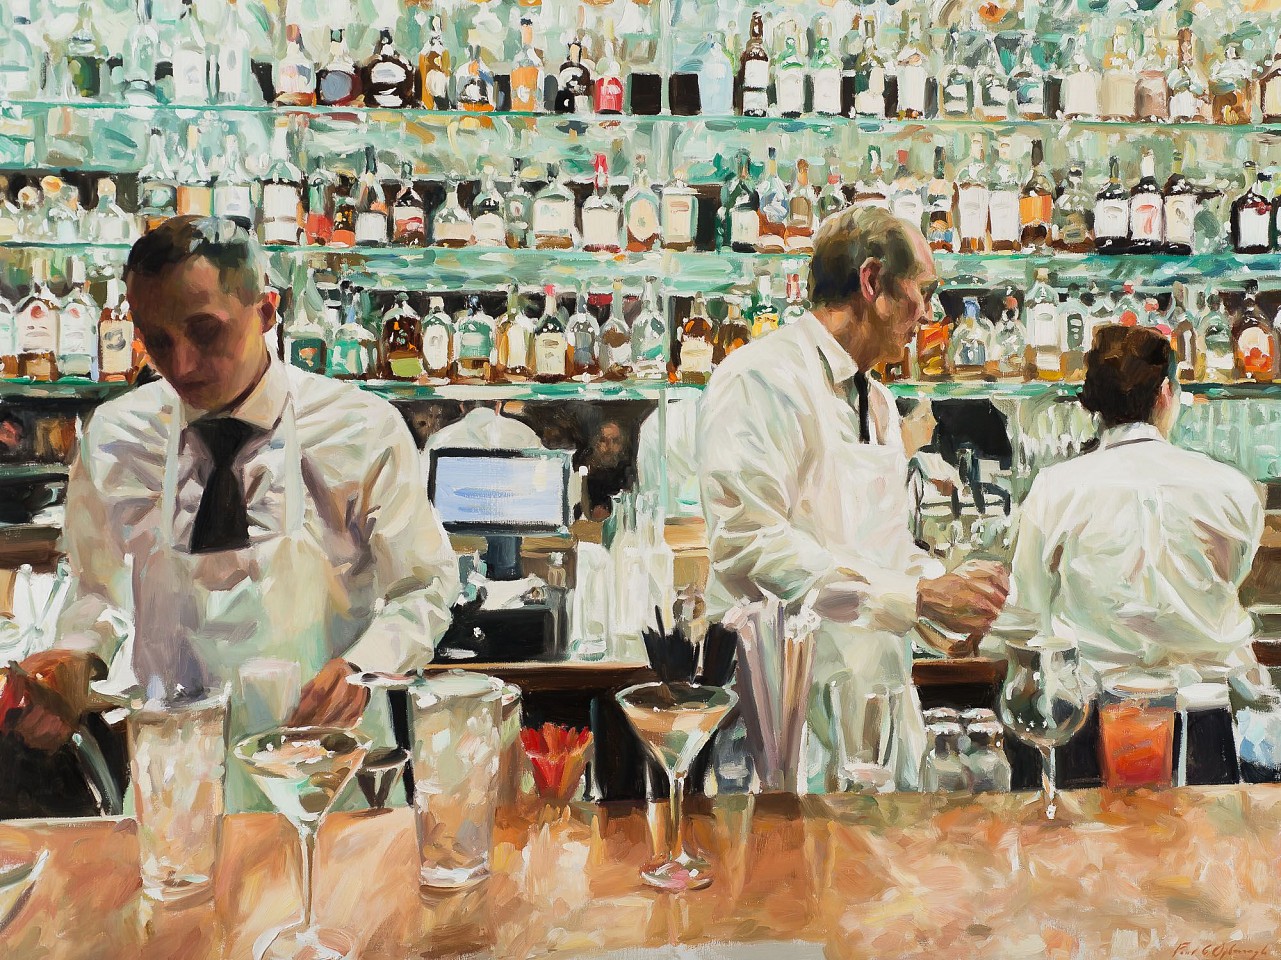 Paul G. Oxborough, Martinis at the Monte Carlo, 2023
oil on linen, 36 x 48 in. (91.4 x 121.9 cm)
PO231003